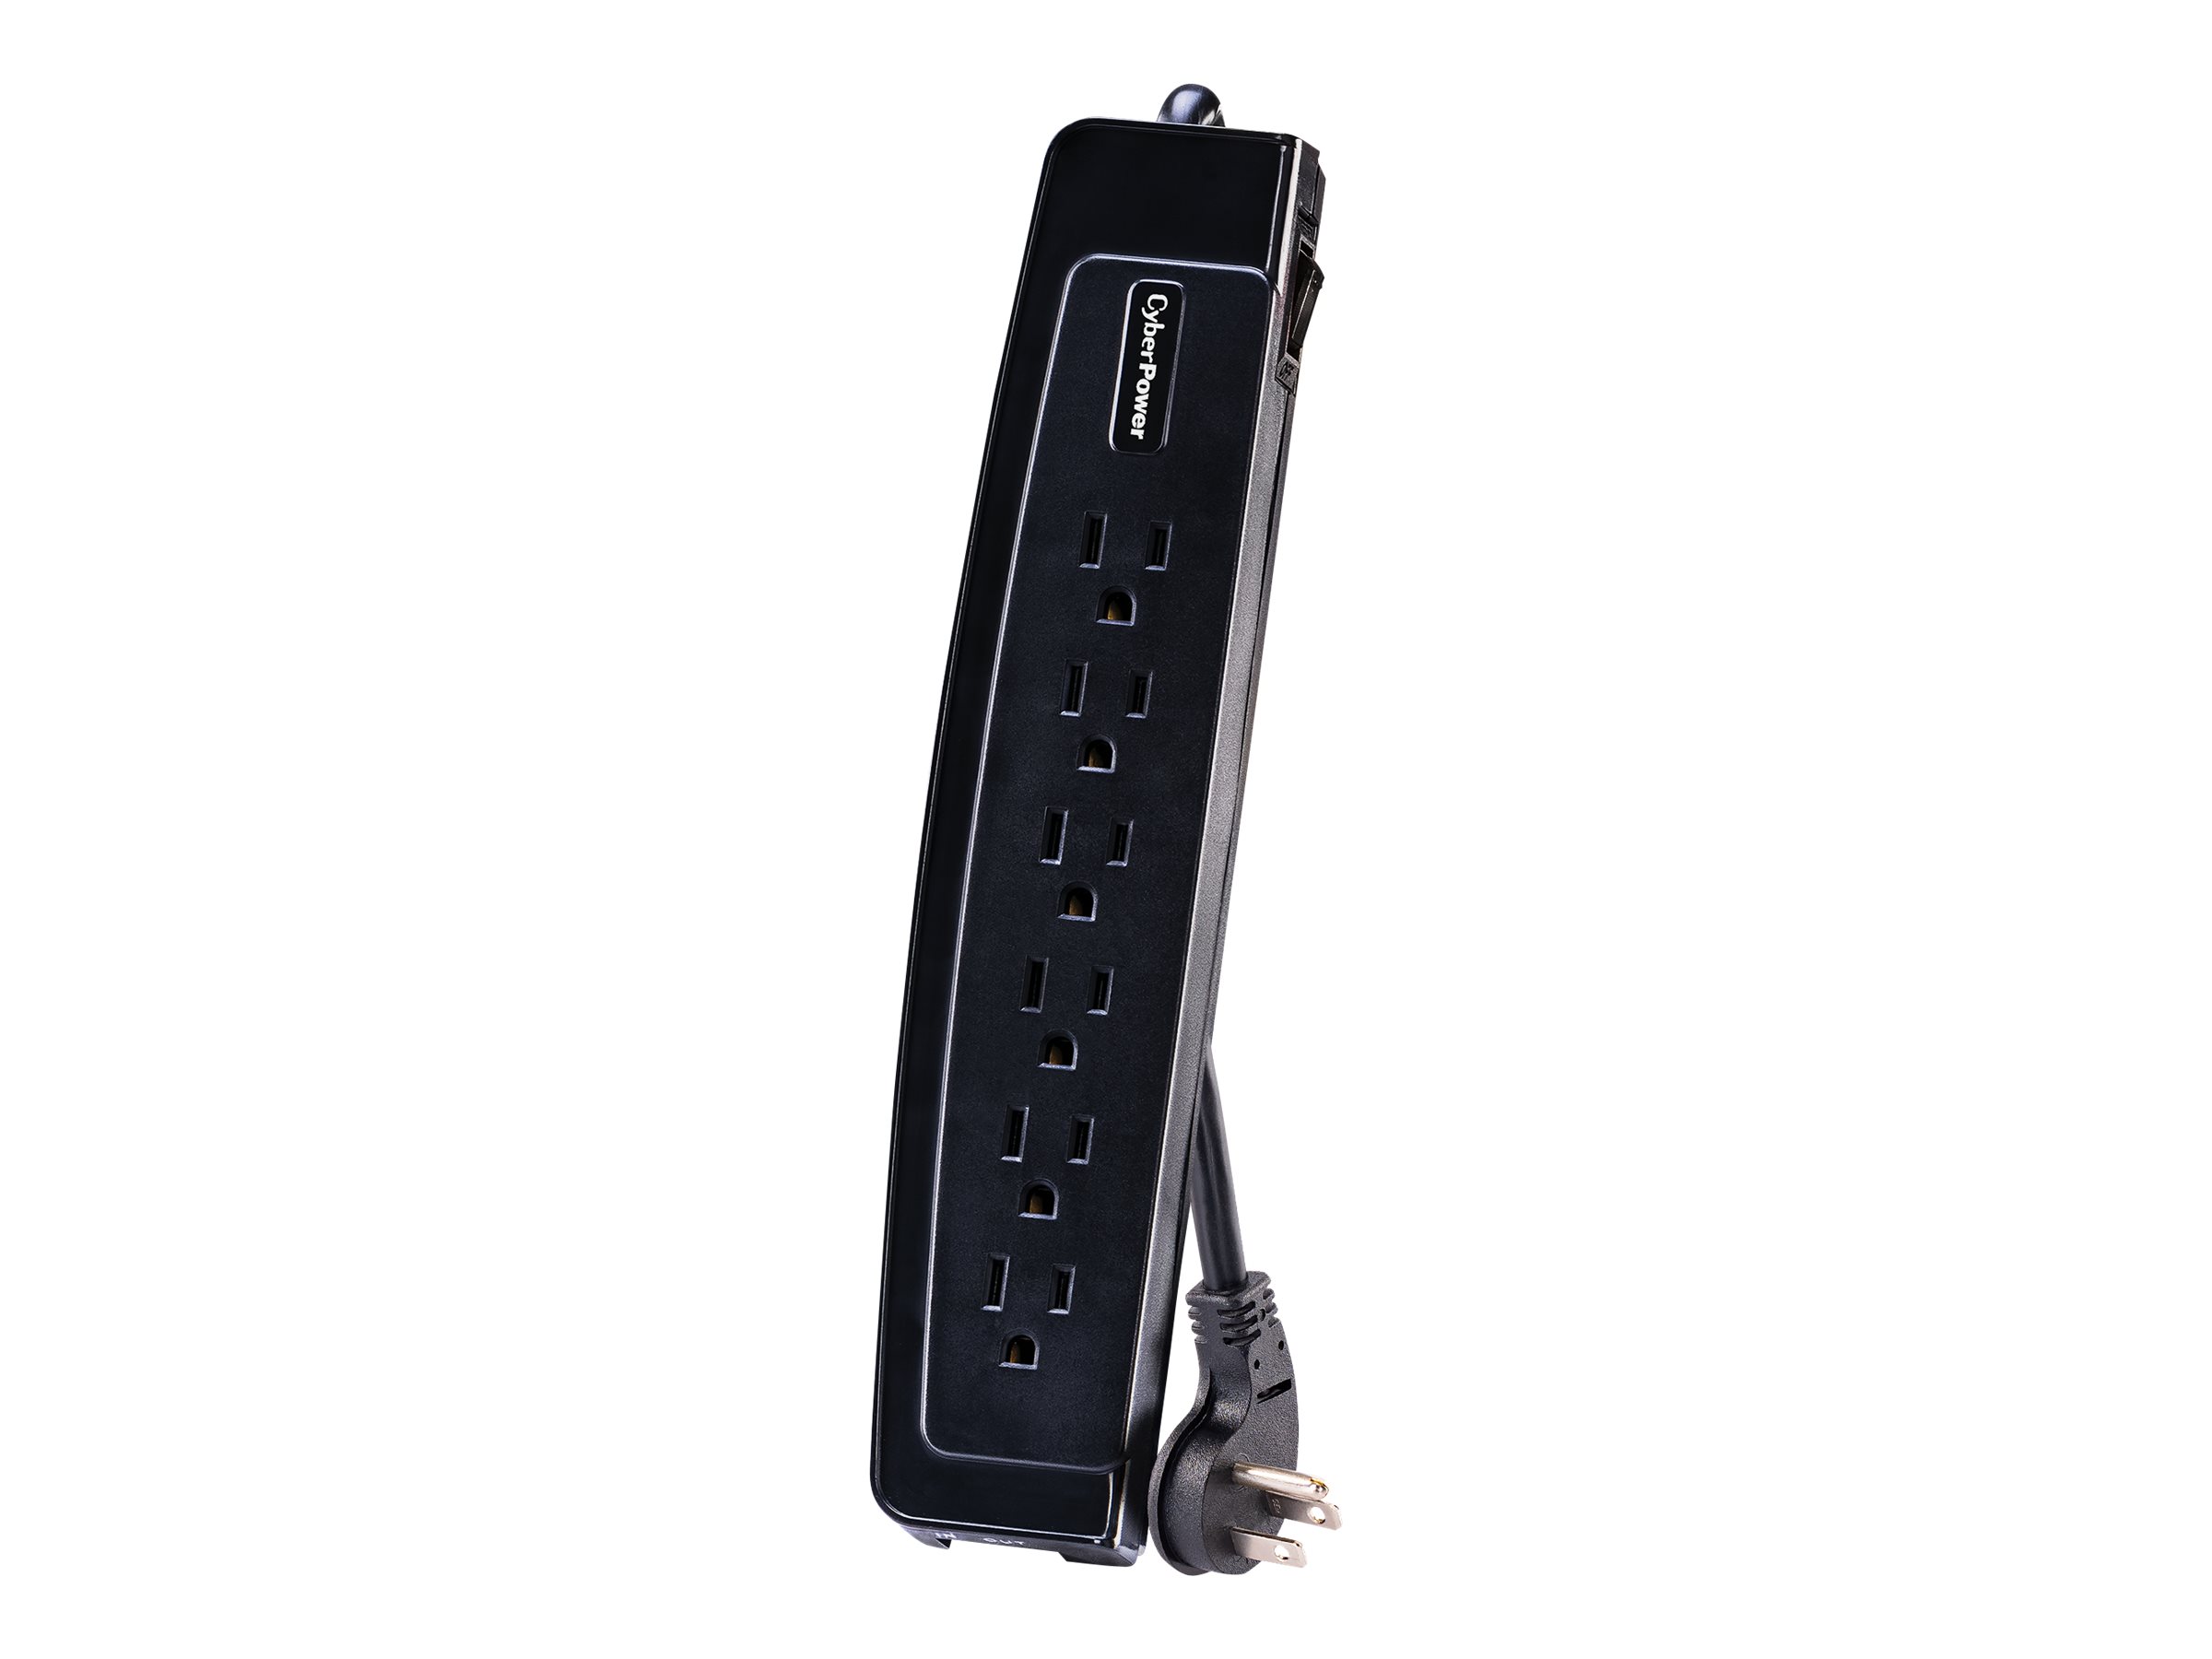 CSP604T PRO SURGE PROTECTOR6OUT RIGHT ANGLE NEMA $75K 4FT CORD